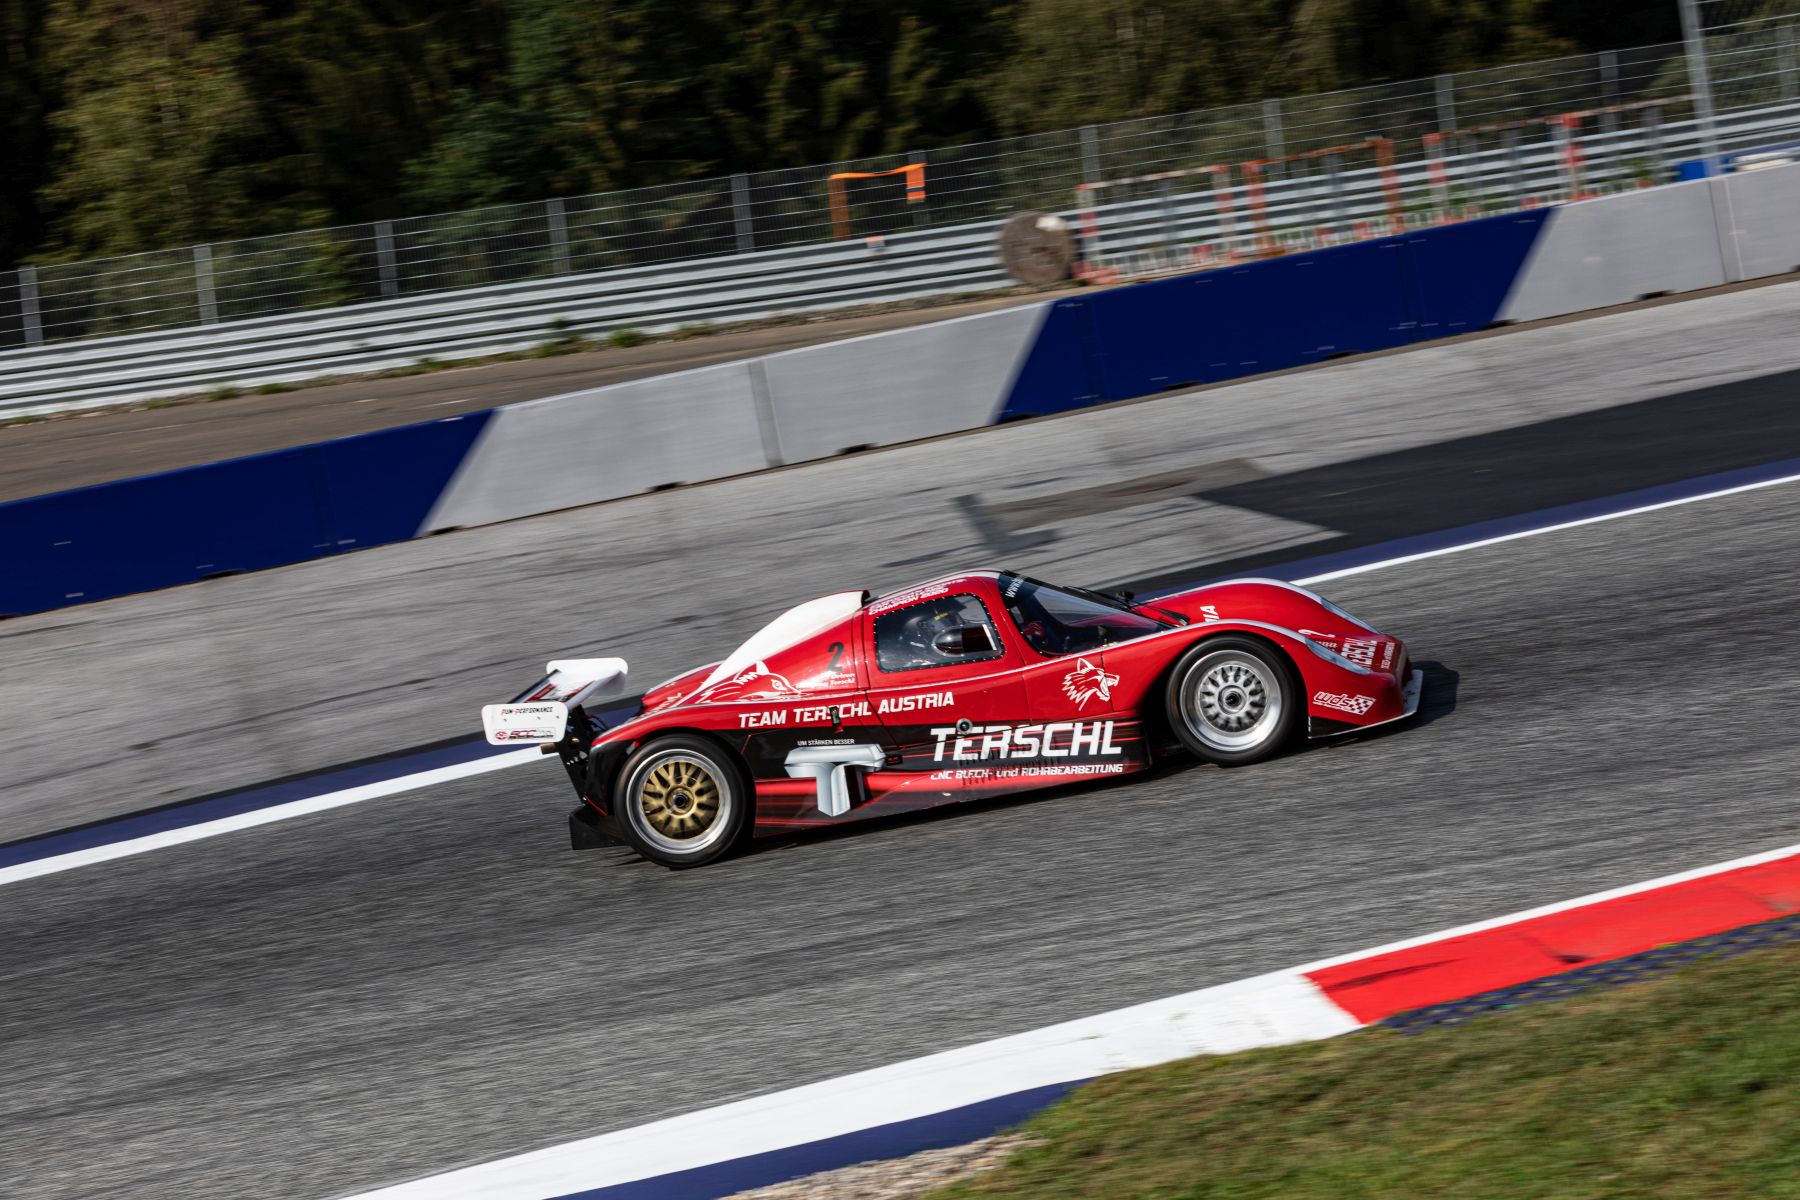 220827-Hollaus-03-MR-9592cl/IGFC Red Bull Ring